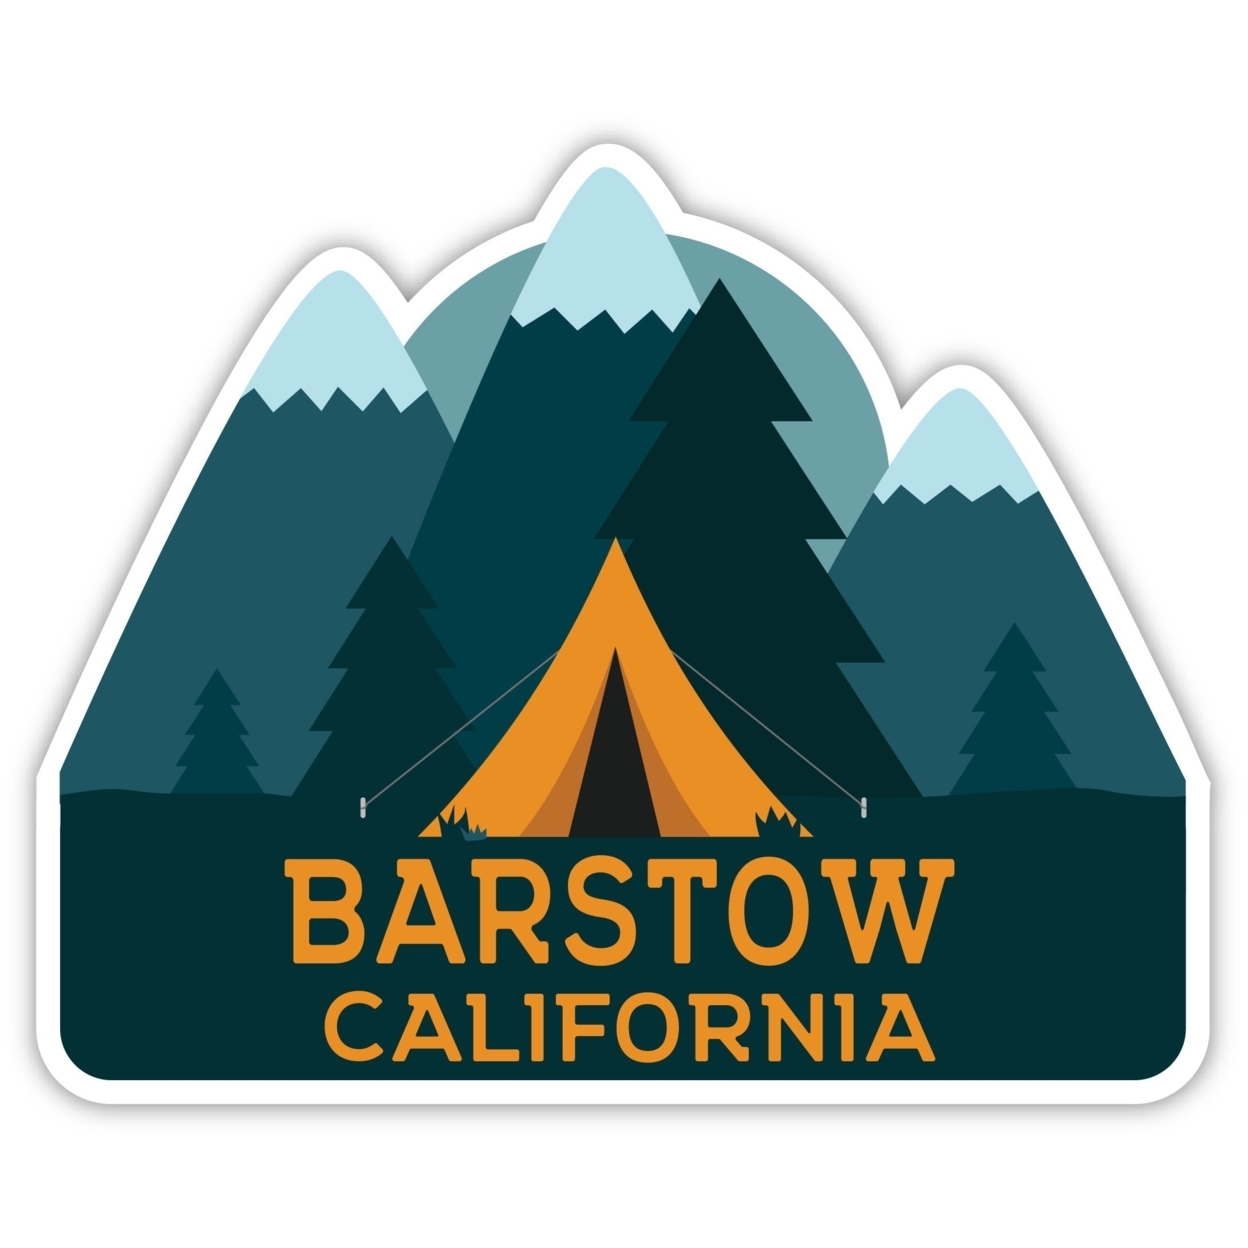 Barstow California Souvenir Decorative Stickers (Choose Theme And Size) - Single Unit, 12-Inch, Tent